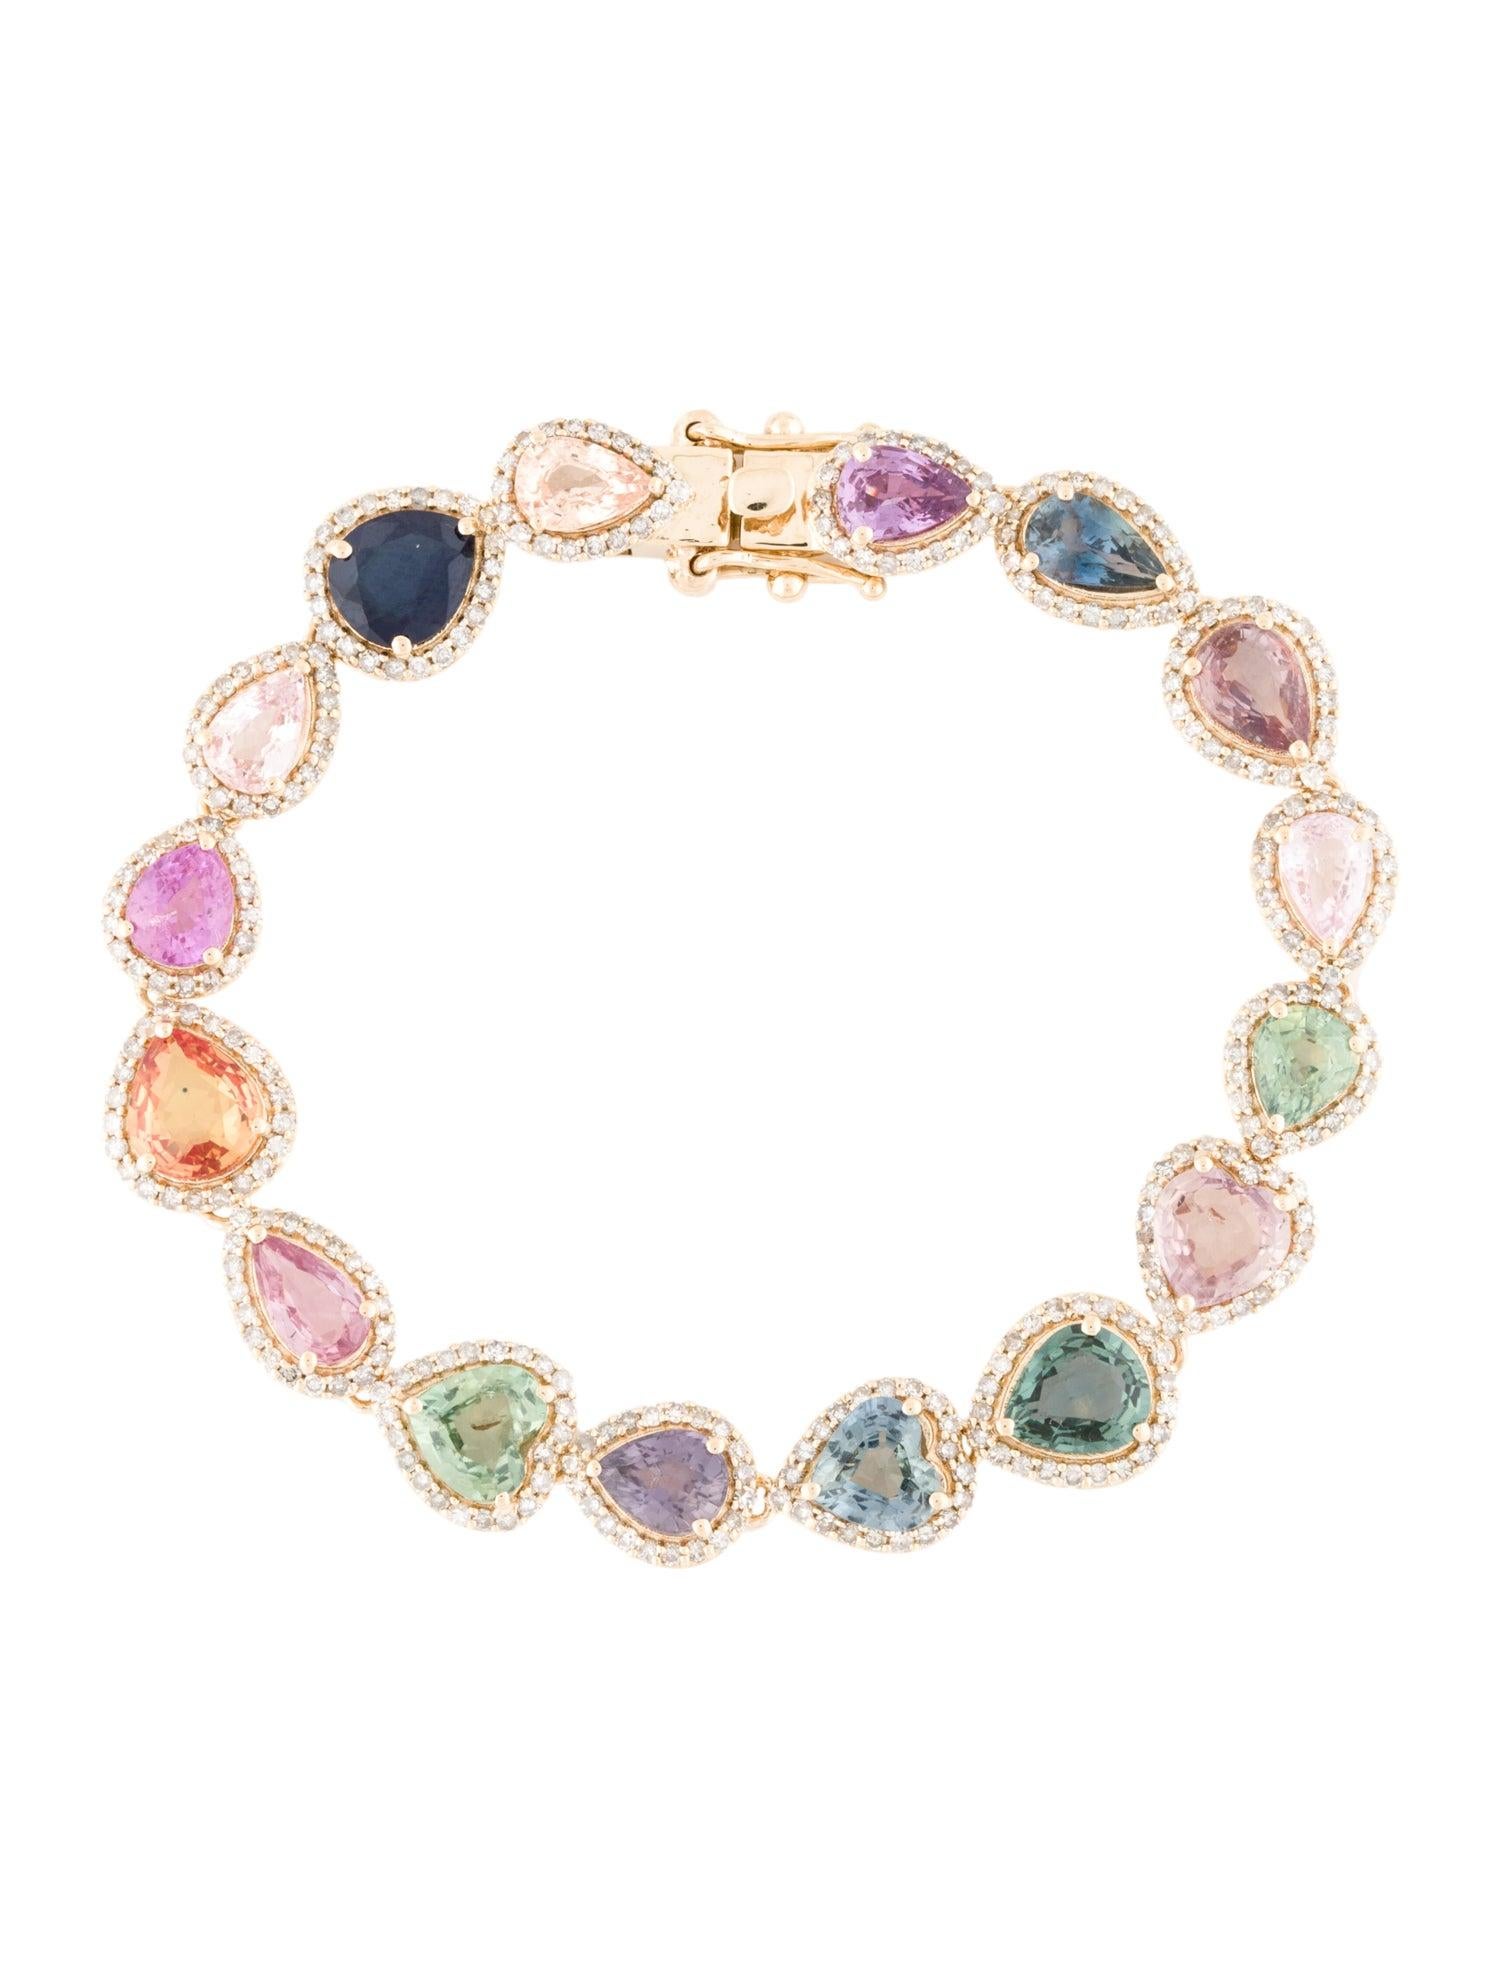 Embrace the vivid hues of the Rainbow Symphony Multi Sapphire Bracelet from Jeweltique. Handcrafted with love and expertise in India, this exquisite piece is a testament to our legacy of quality and craftsmanship spanning over five decades.

The